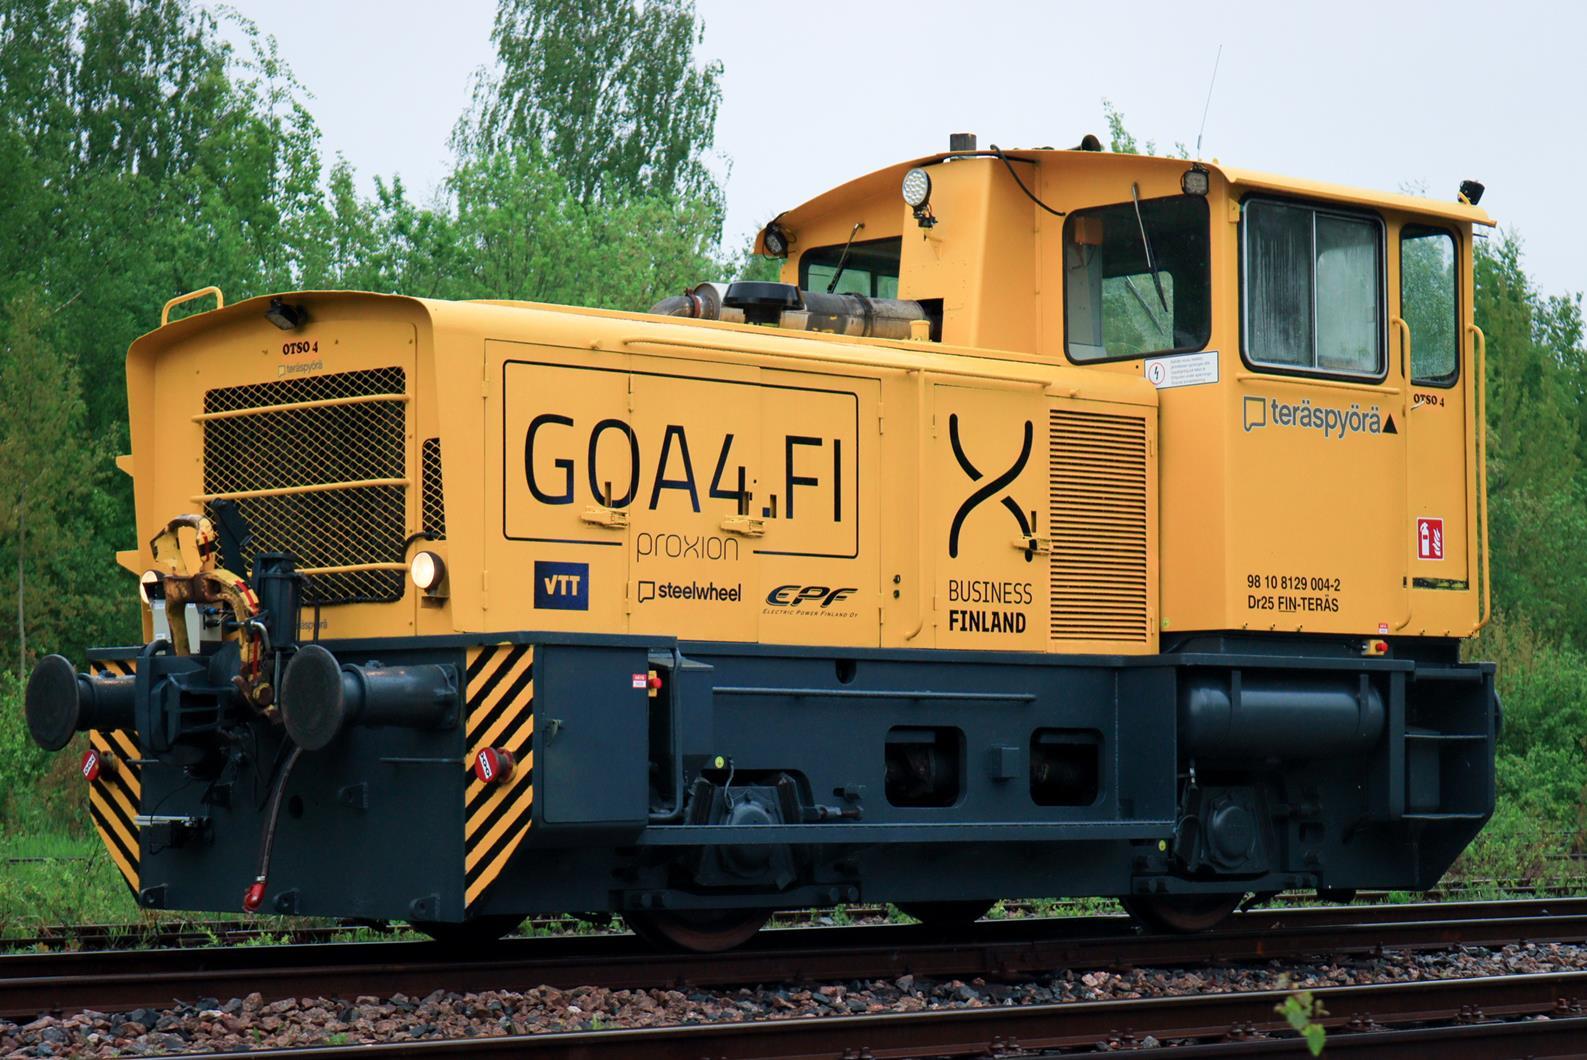 Shunting locomotive with GoA4 ATO system being tested in the Voikkaa industrial area, Finland